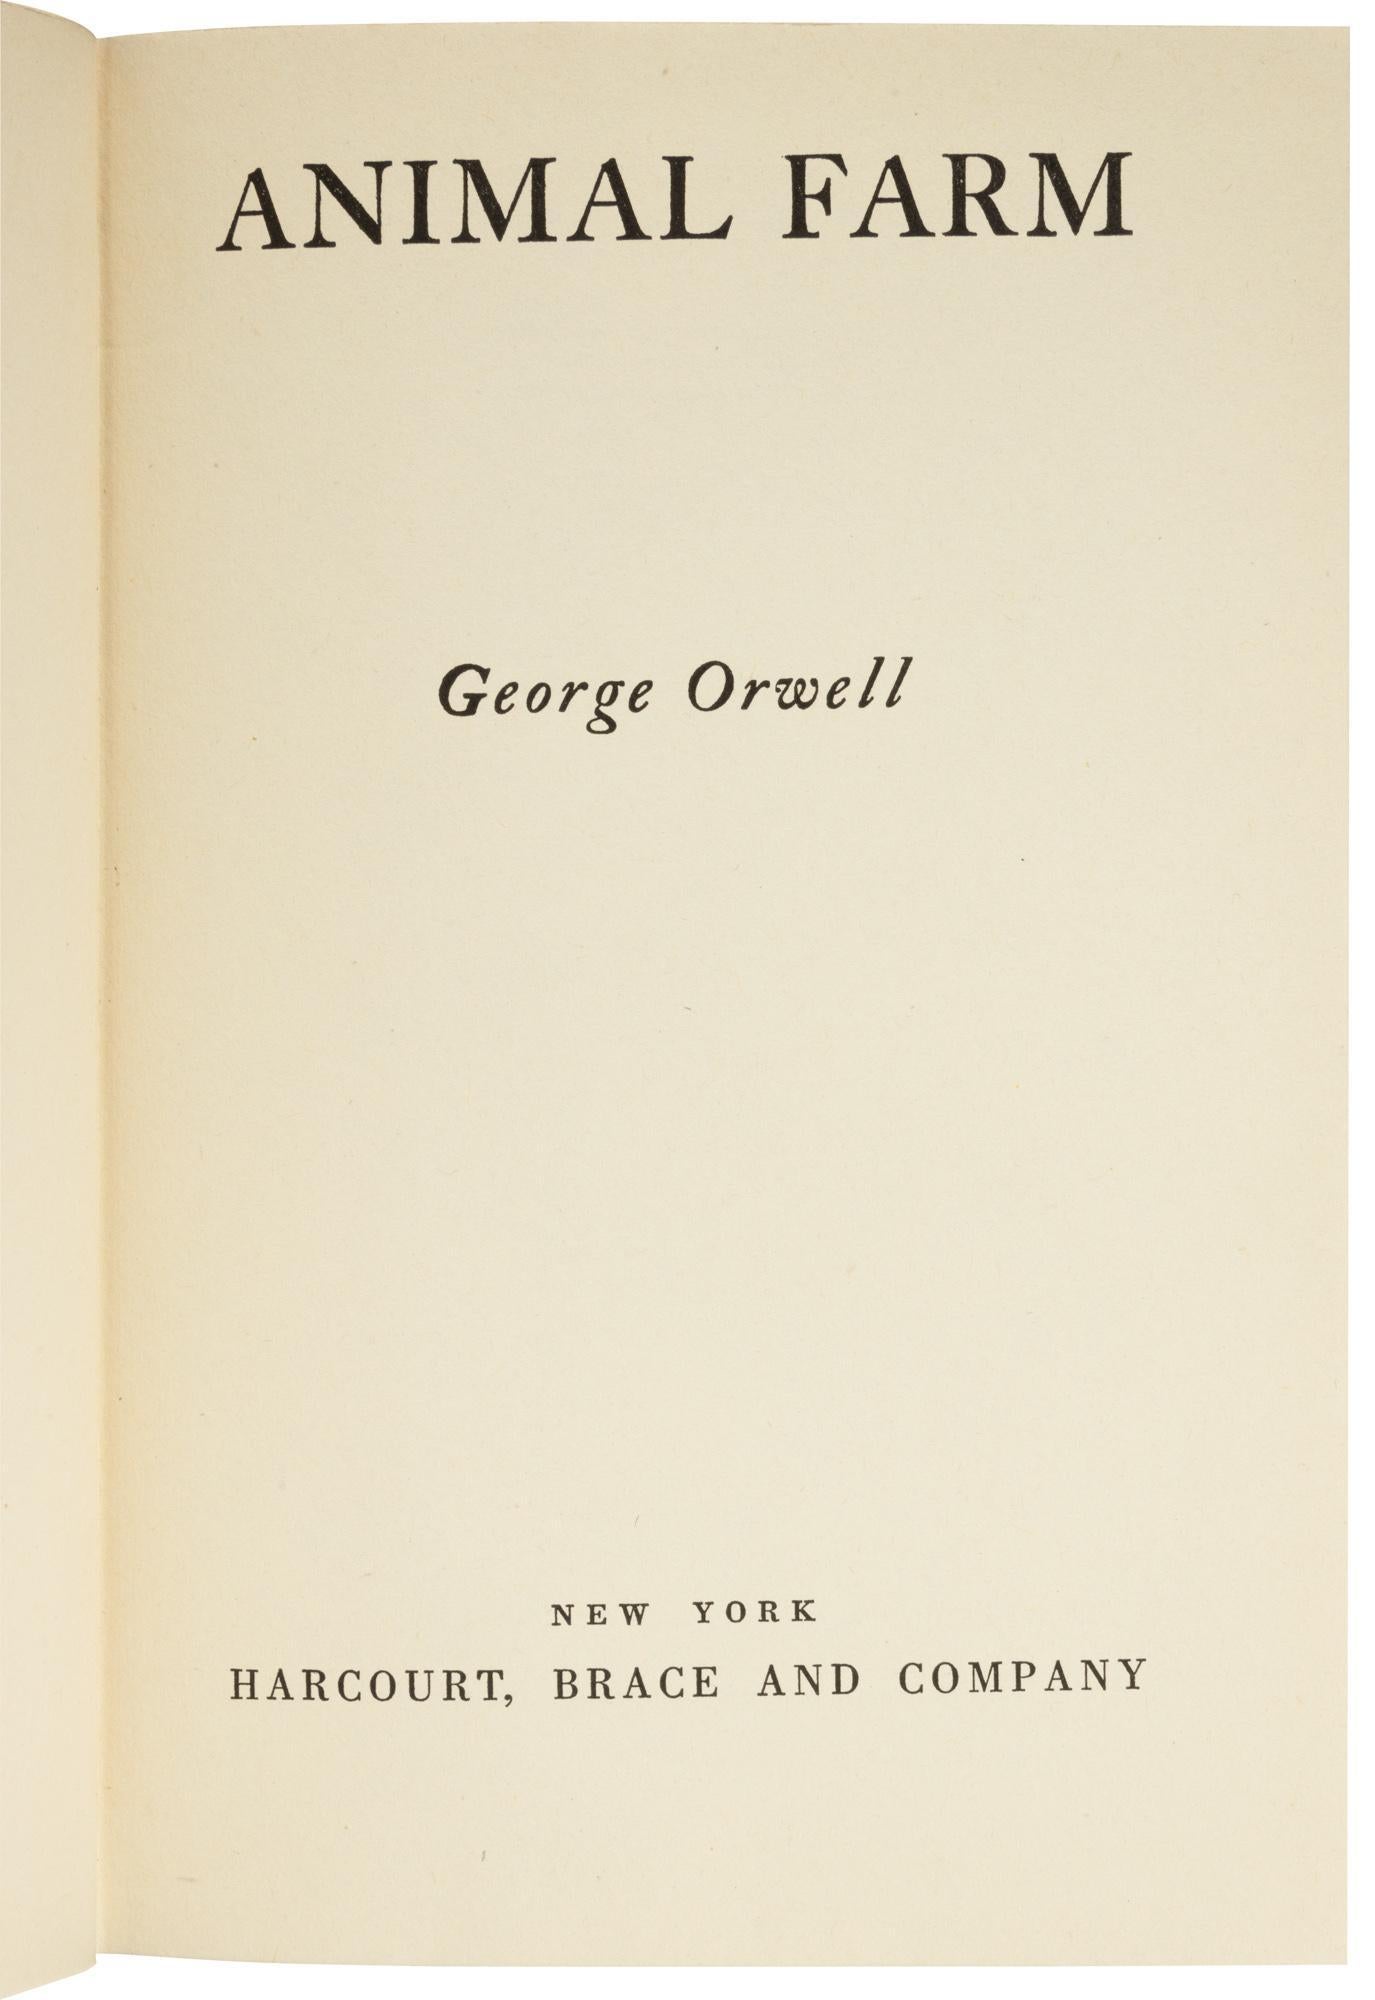 Orwell, George. Animal Farm. New York: Harcourt, Brace and Company, [1946]. First U.S. Edition. Octavo. In publisher's original first edition dust jacket and black cloth hardcover boards. With new archival quarter leather and cloth clamshell. 

This